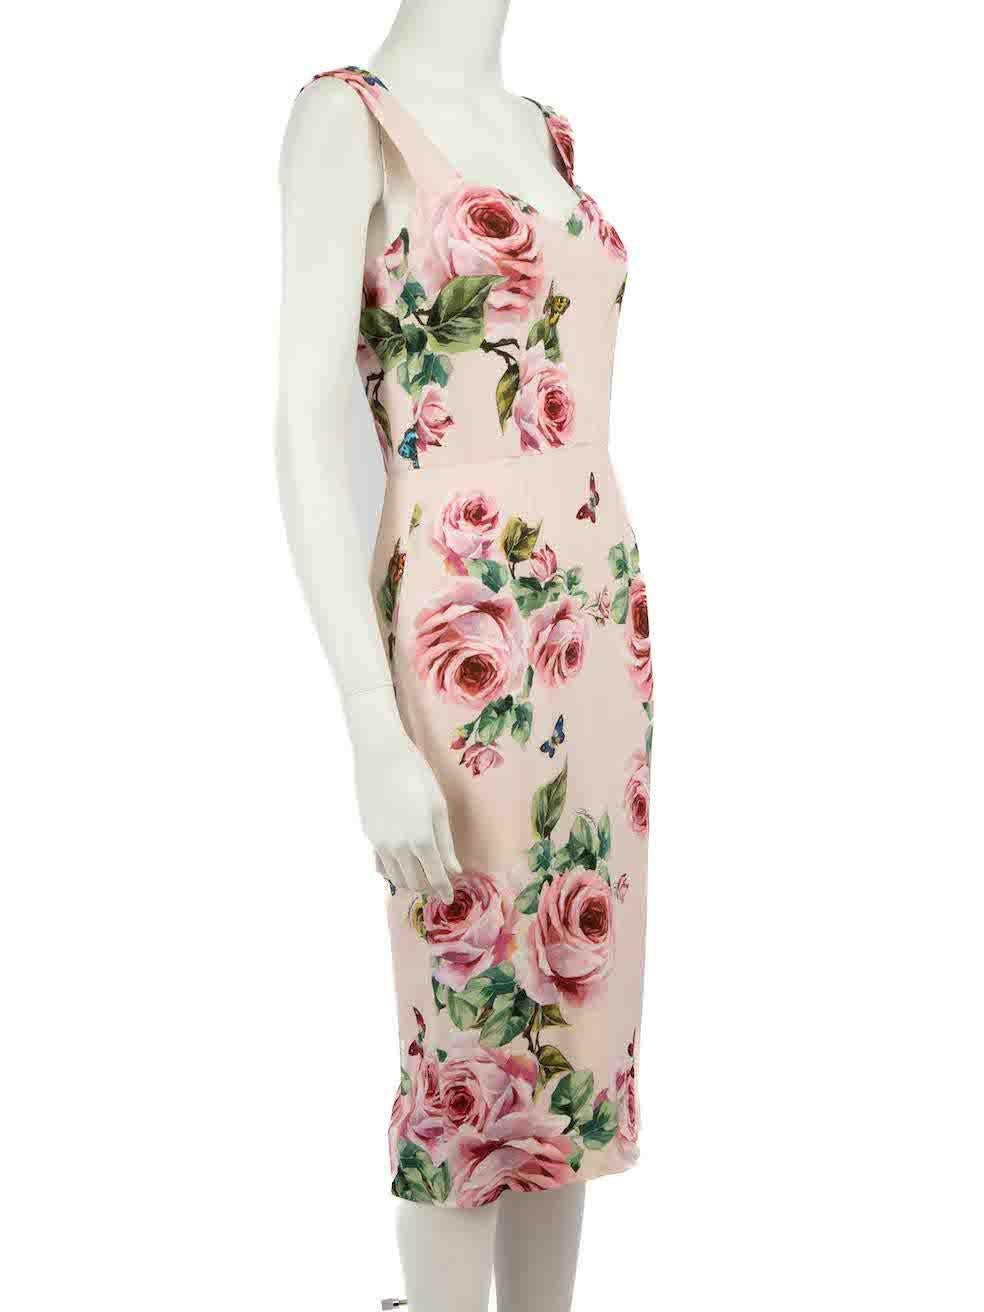 CONDITION is Very good. Hardly any visible wear to dress is evident on this used Dolce & Gabbana designer resale item.
 
 Details
 Pink
 Silk
 Dress
 Rose pattern
 Sleeveless
 Sweetheart neckline
 Midi
 Figure hugging fit
 Back zip and hook